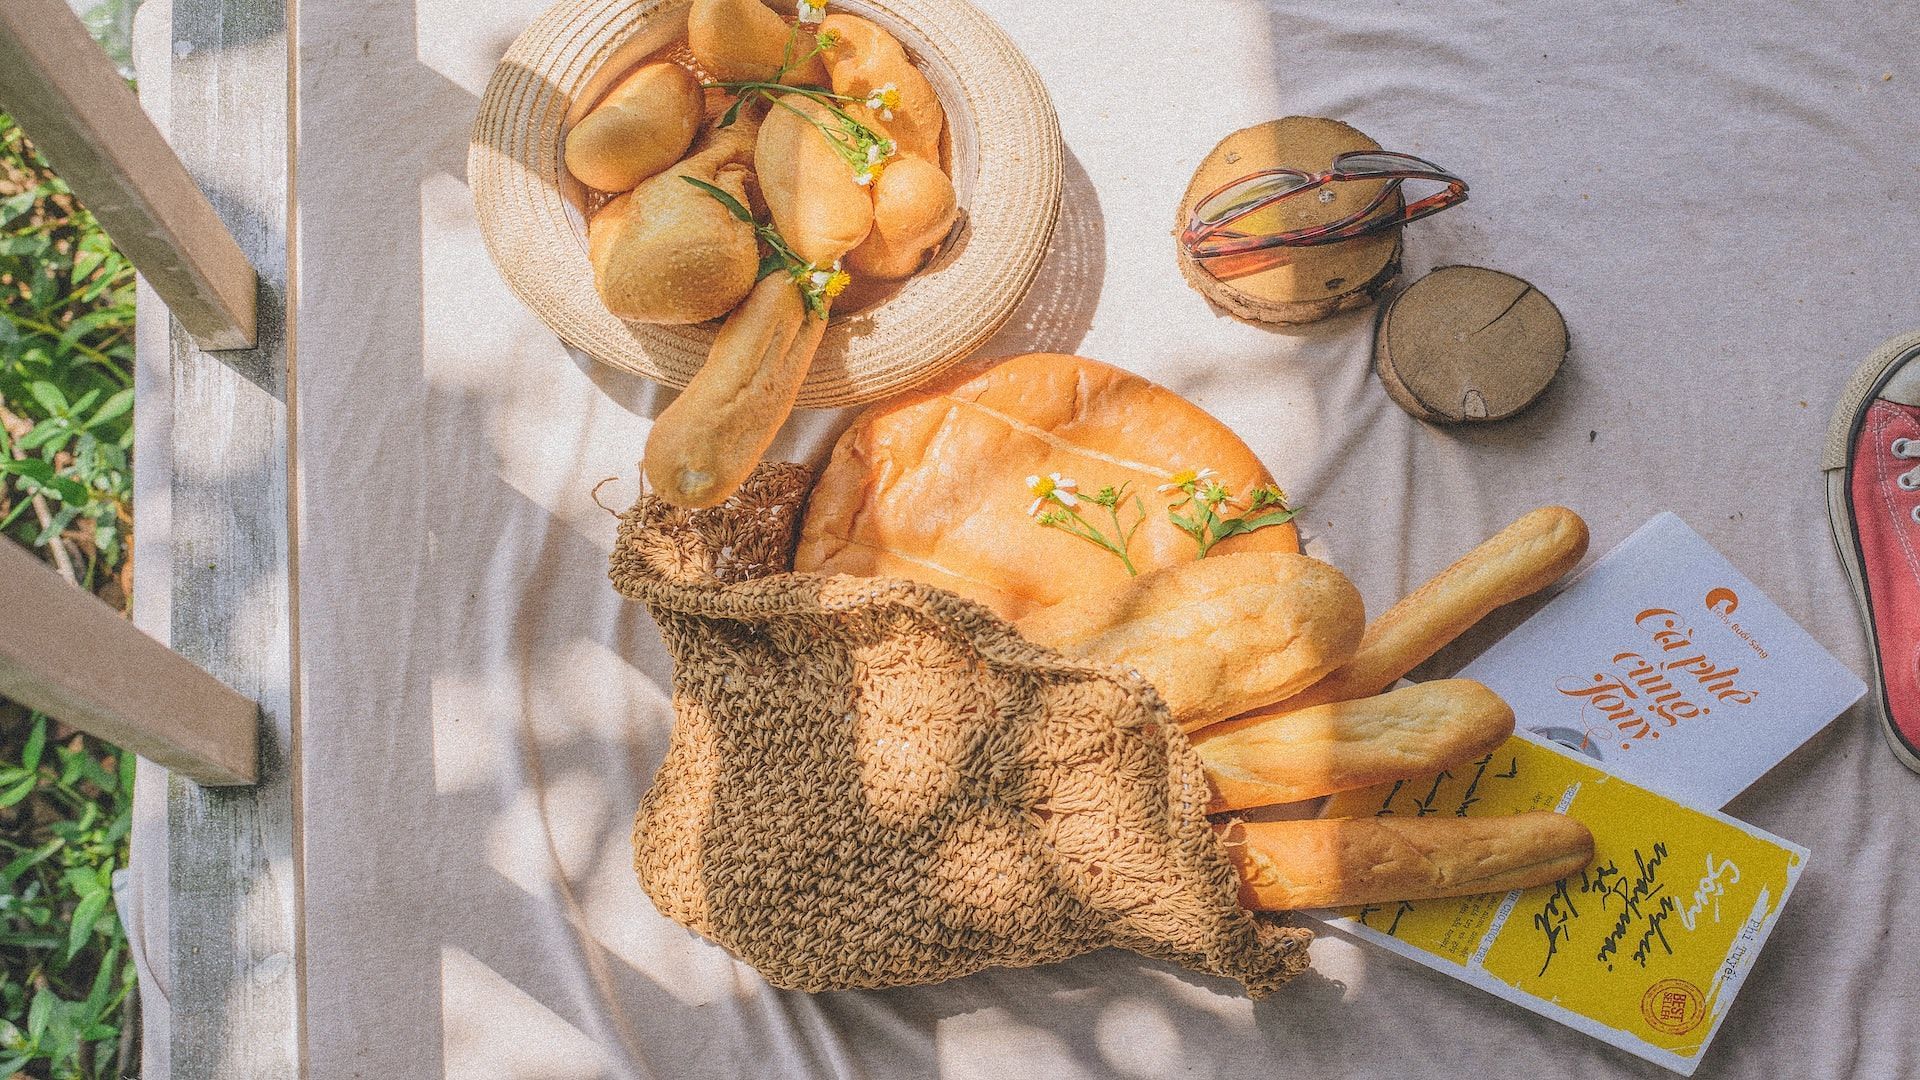 Breads are to be avoided. Image via Pexels/Tan Danh